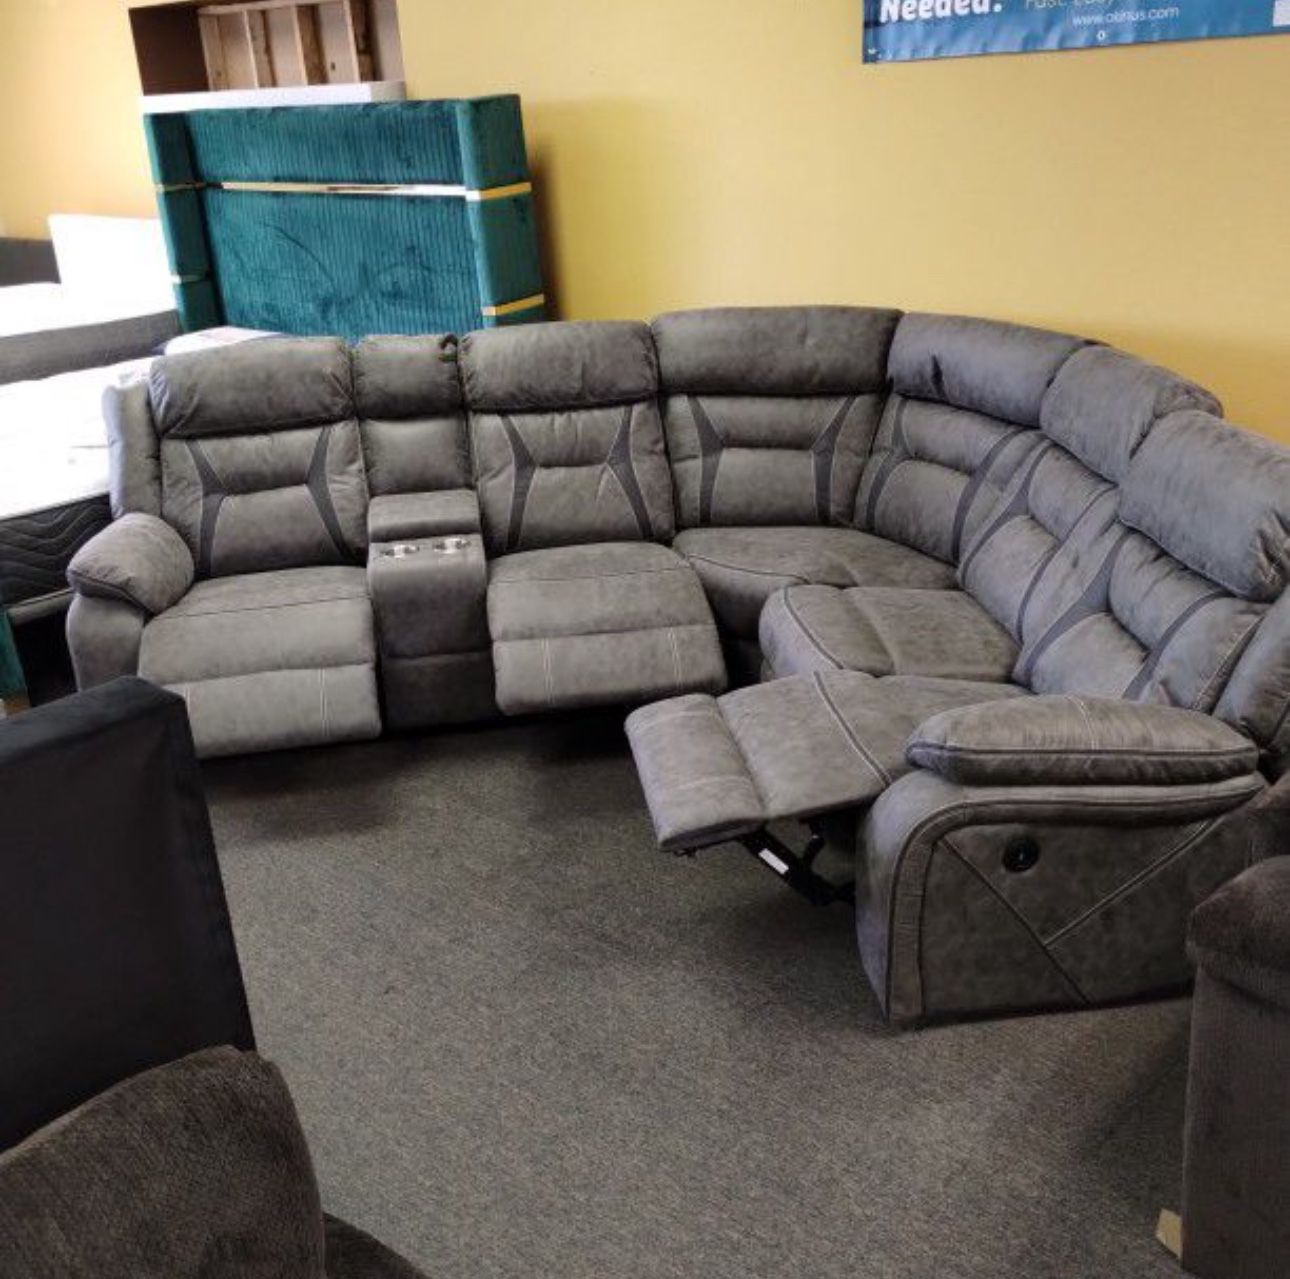 New liberty, gray power reclining sectional with power outlet, including free delivery